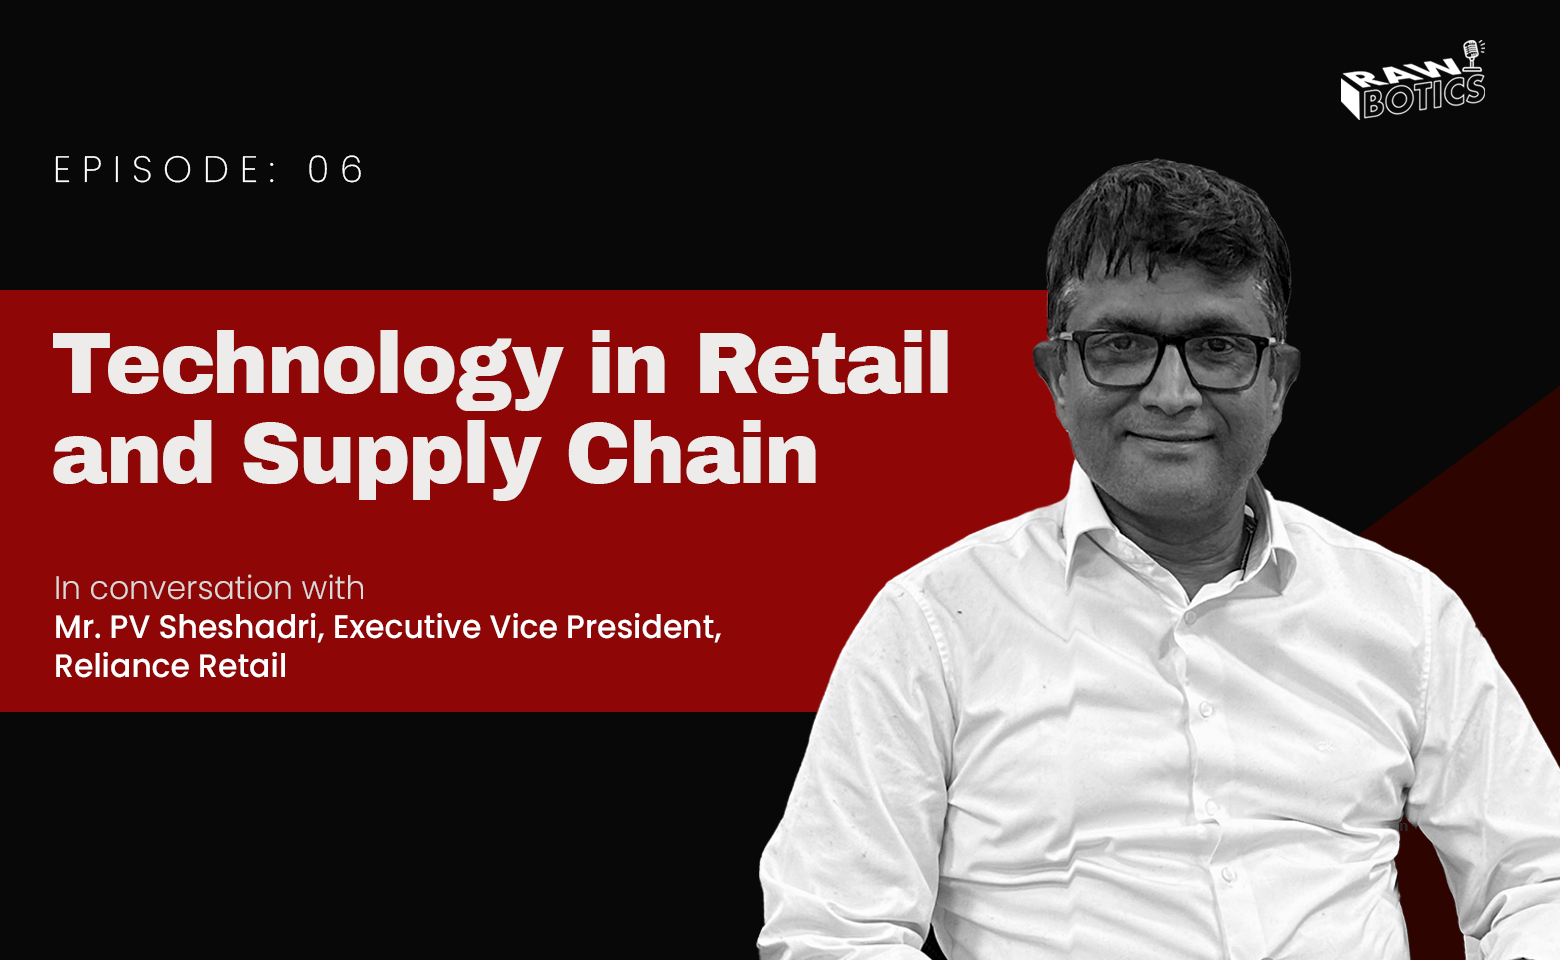 Technology in Retail and Supply Chain